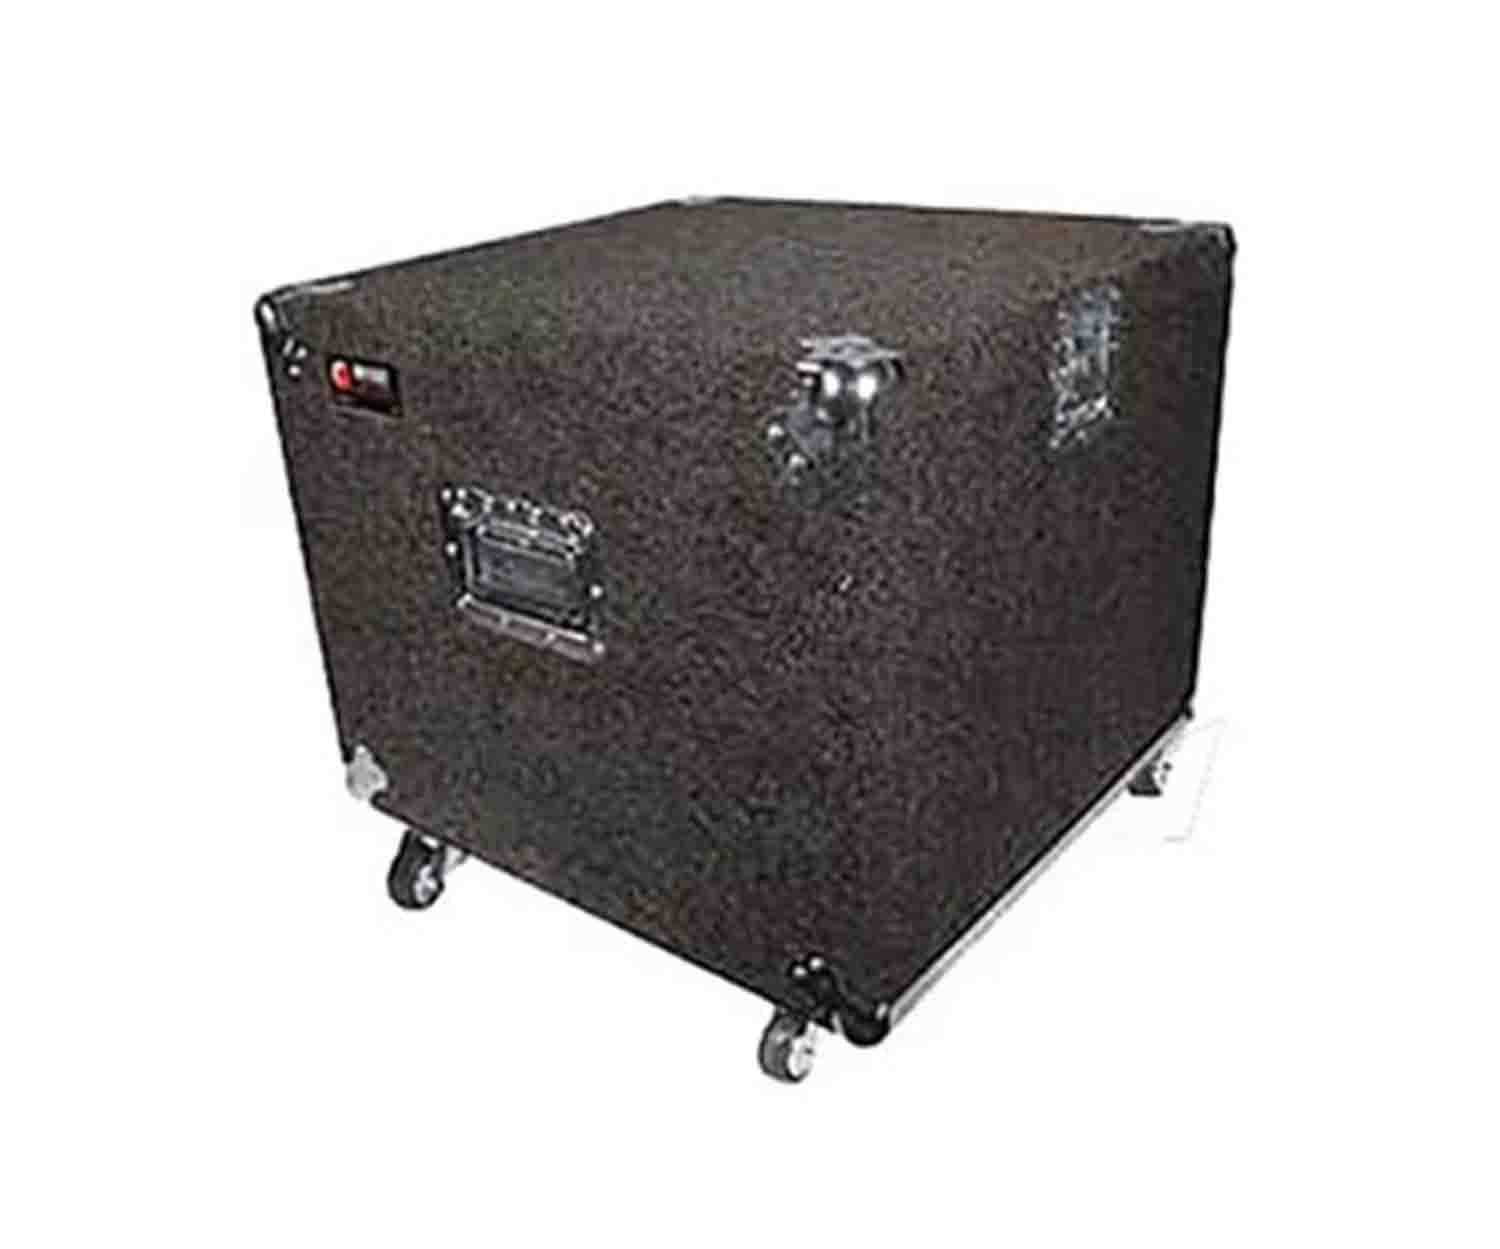 Odyssey CRP10W Pro 10U Carpeted Amp Rack Case with Wheels - Hollywood DJ